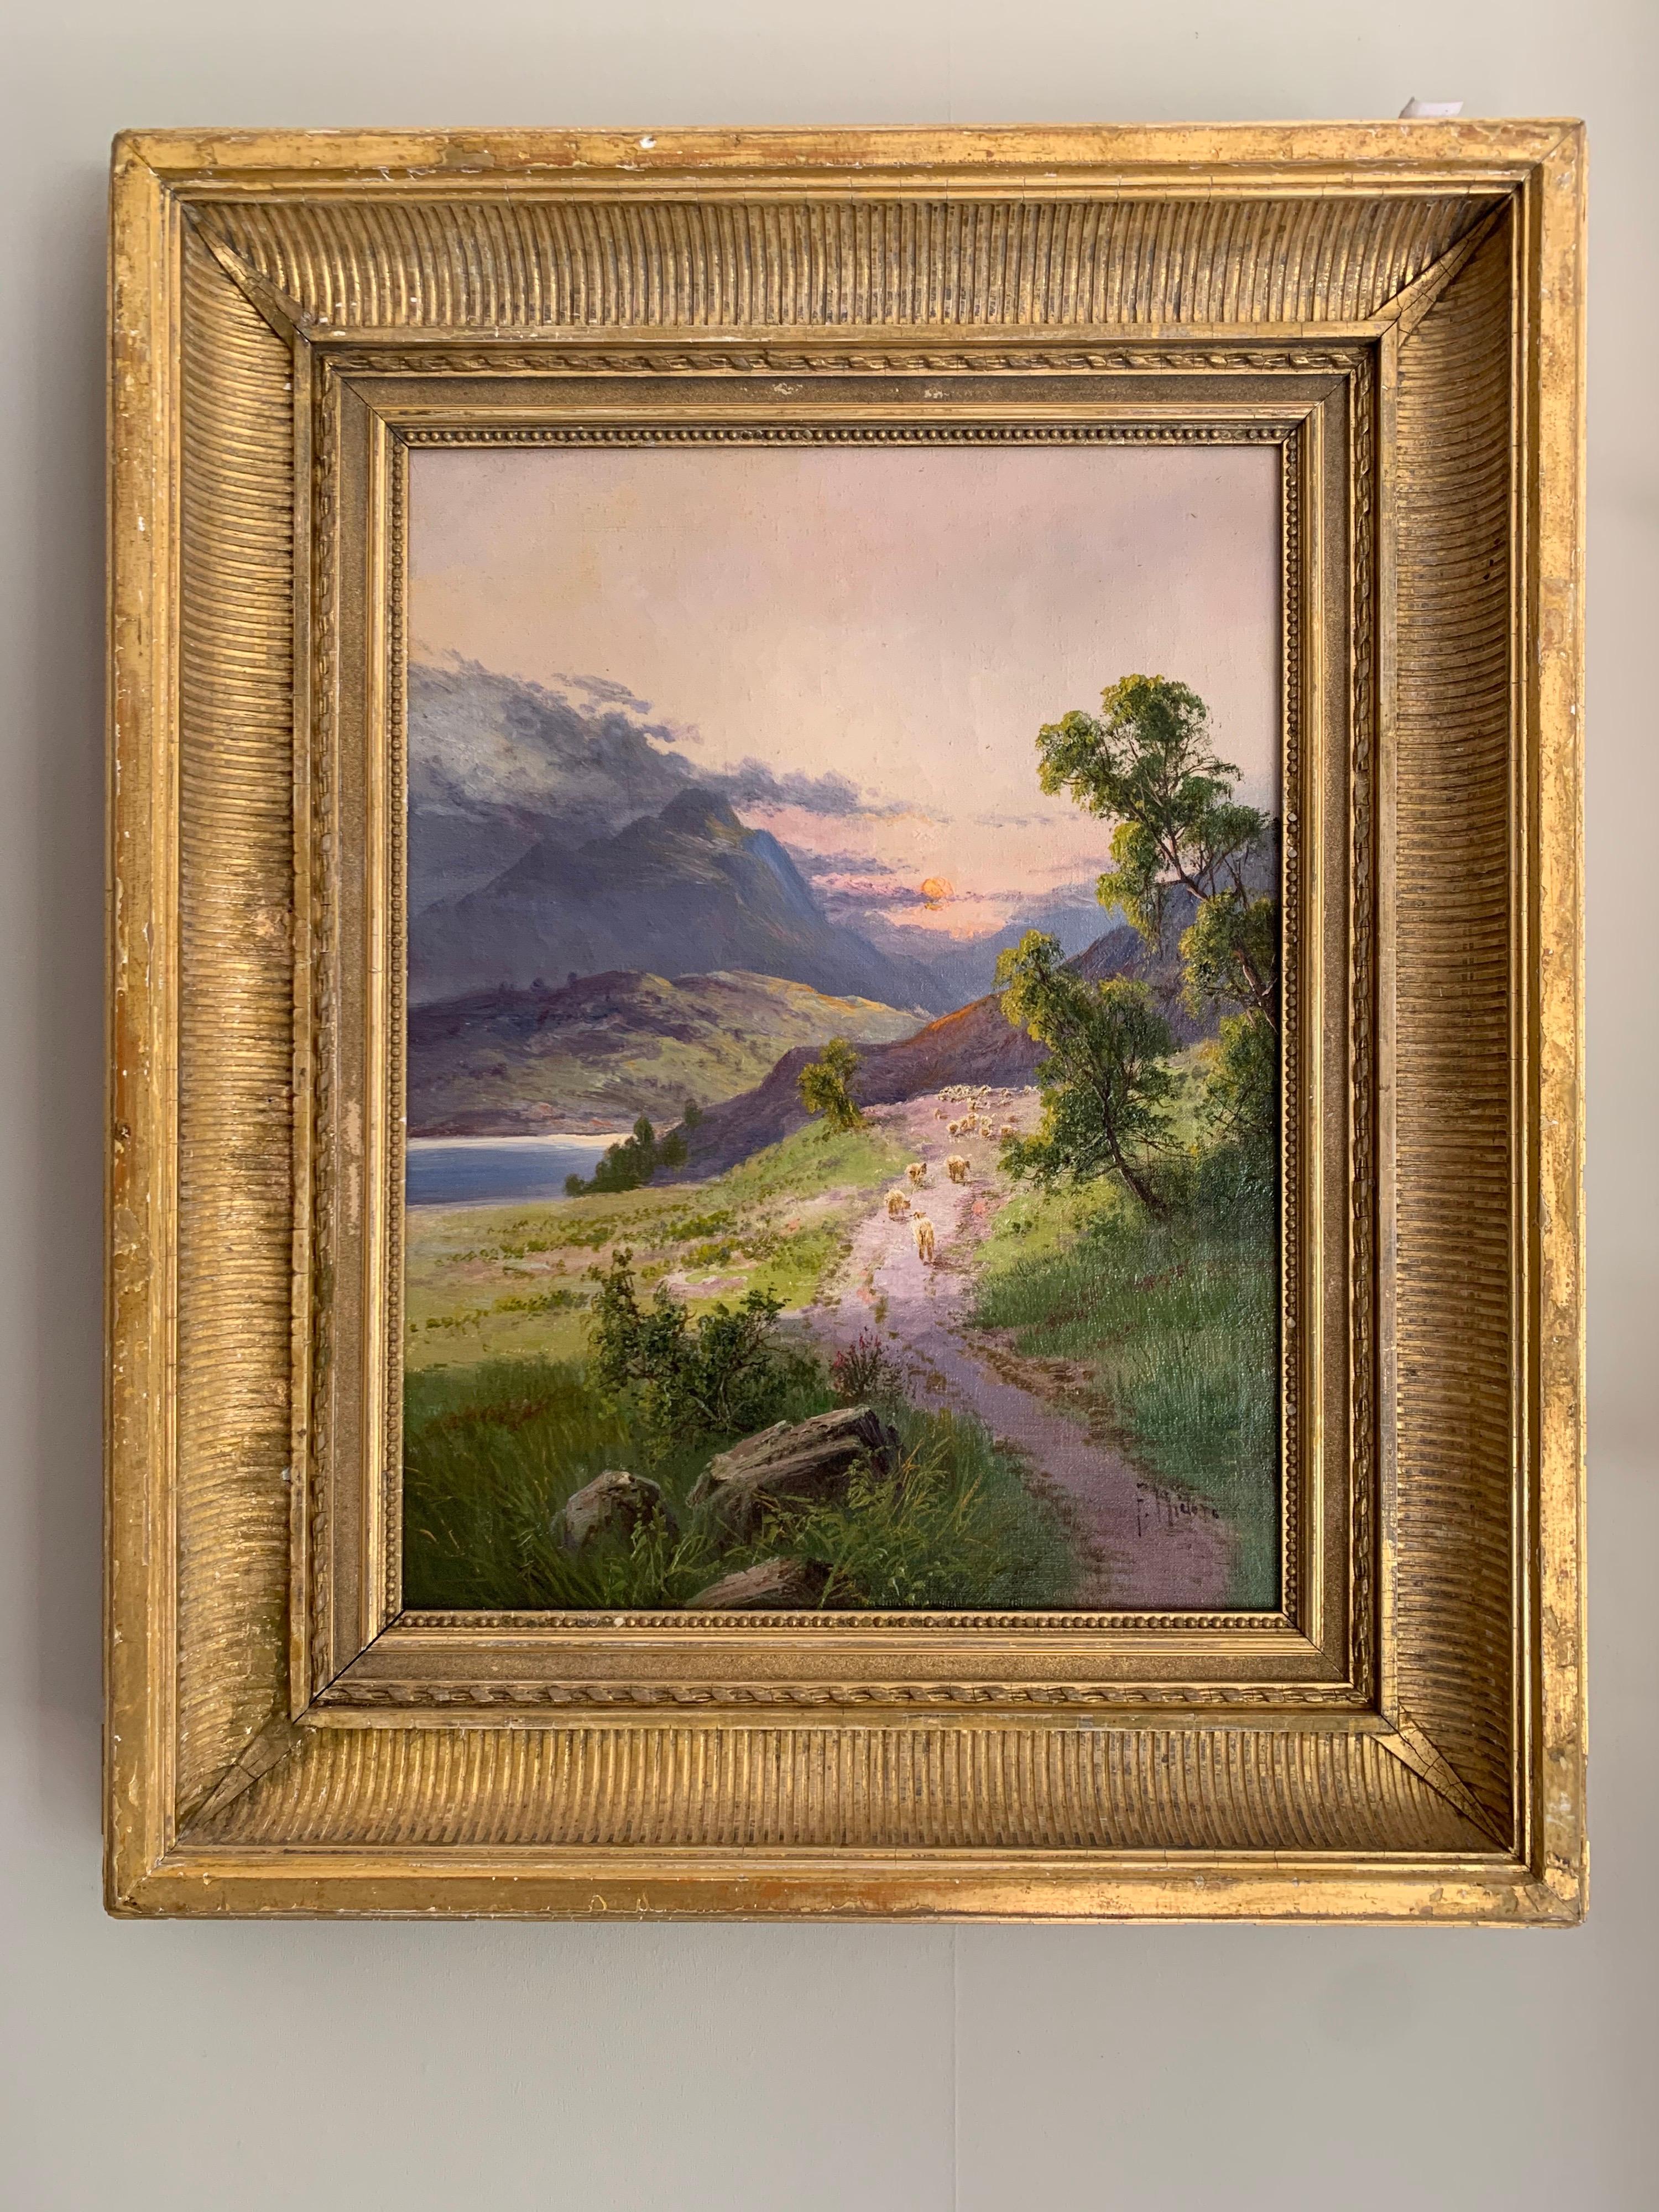 The Highland Sunset Sheep on Pathway beside Loch Signed Antique Oil Painting - Brown Animal Painting by Frank Hider